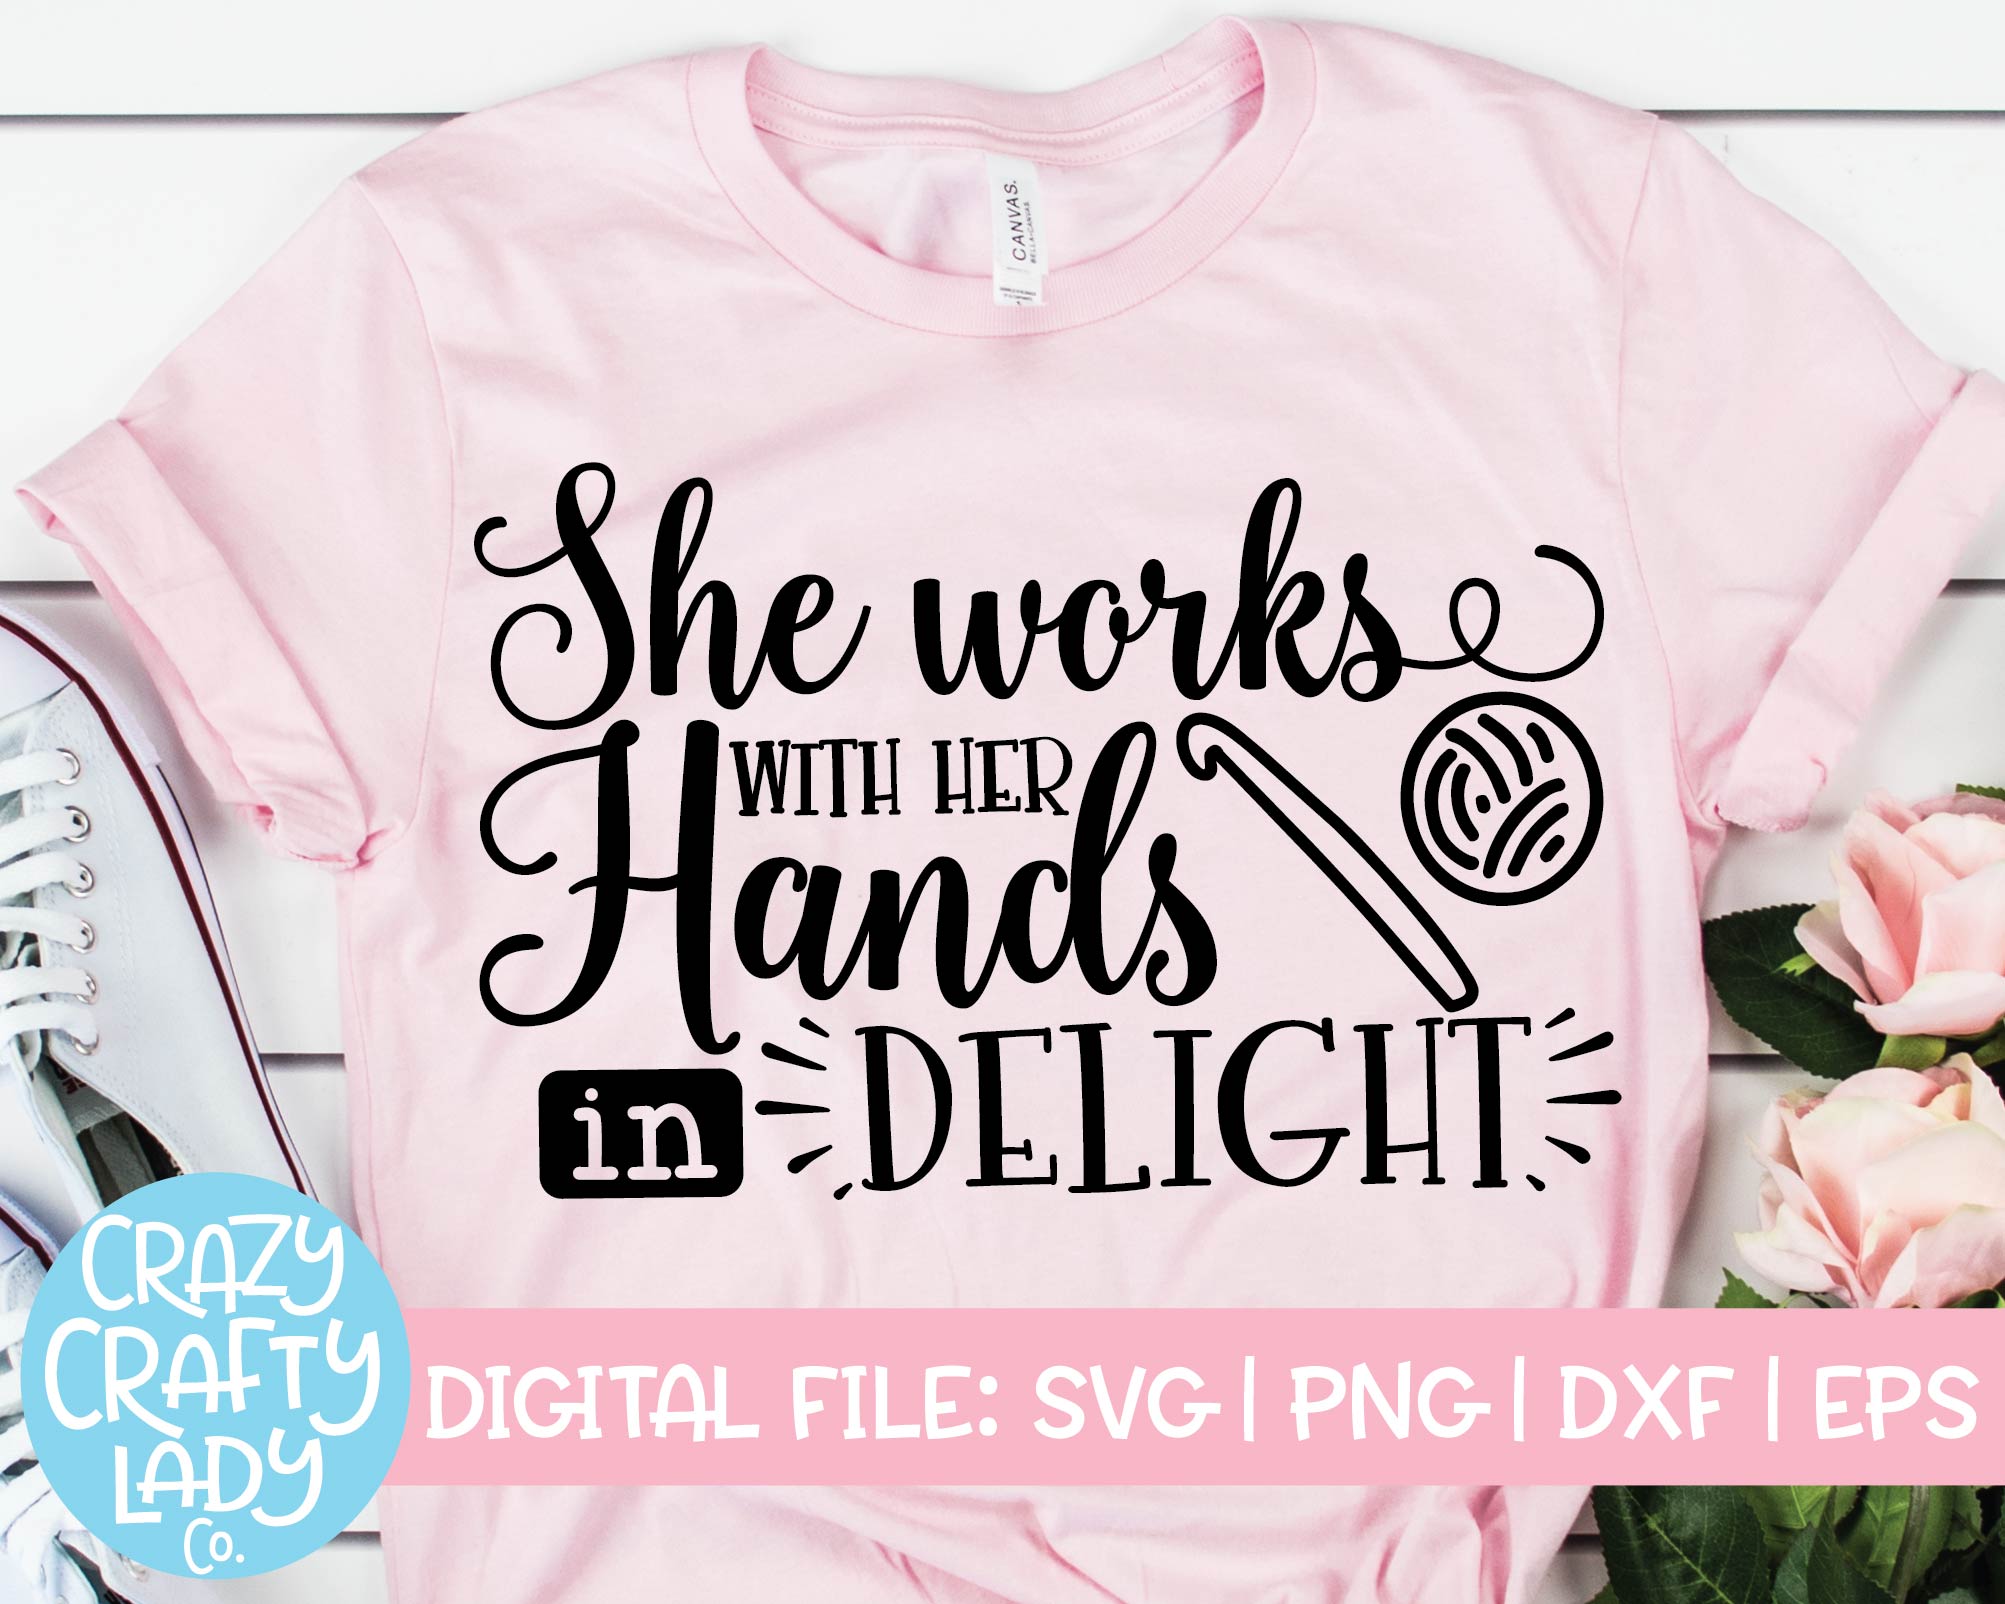 Download She Works With Her Hands In Delight Svg Cut File Crazy Crafty Lady Co